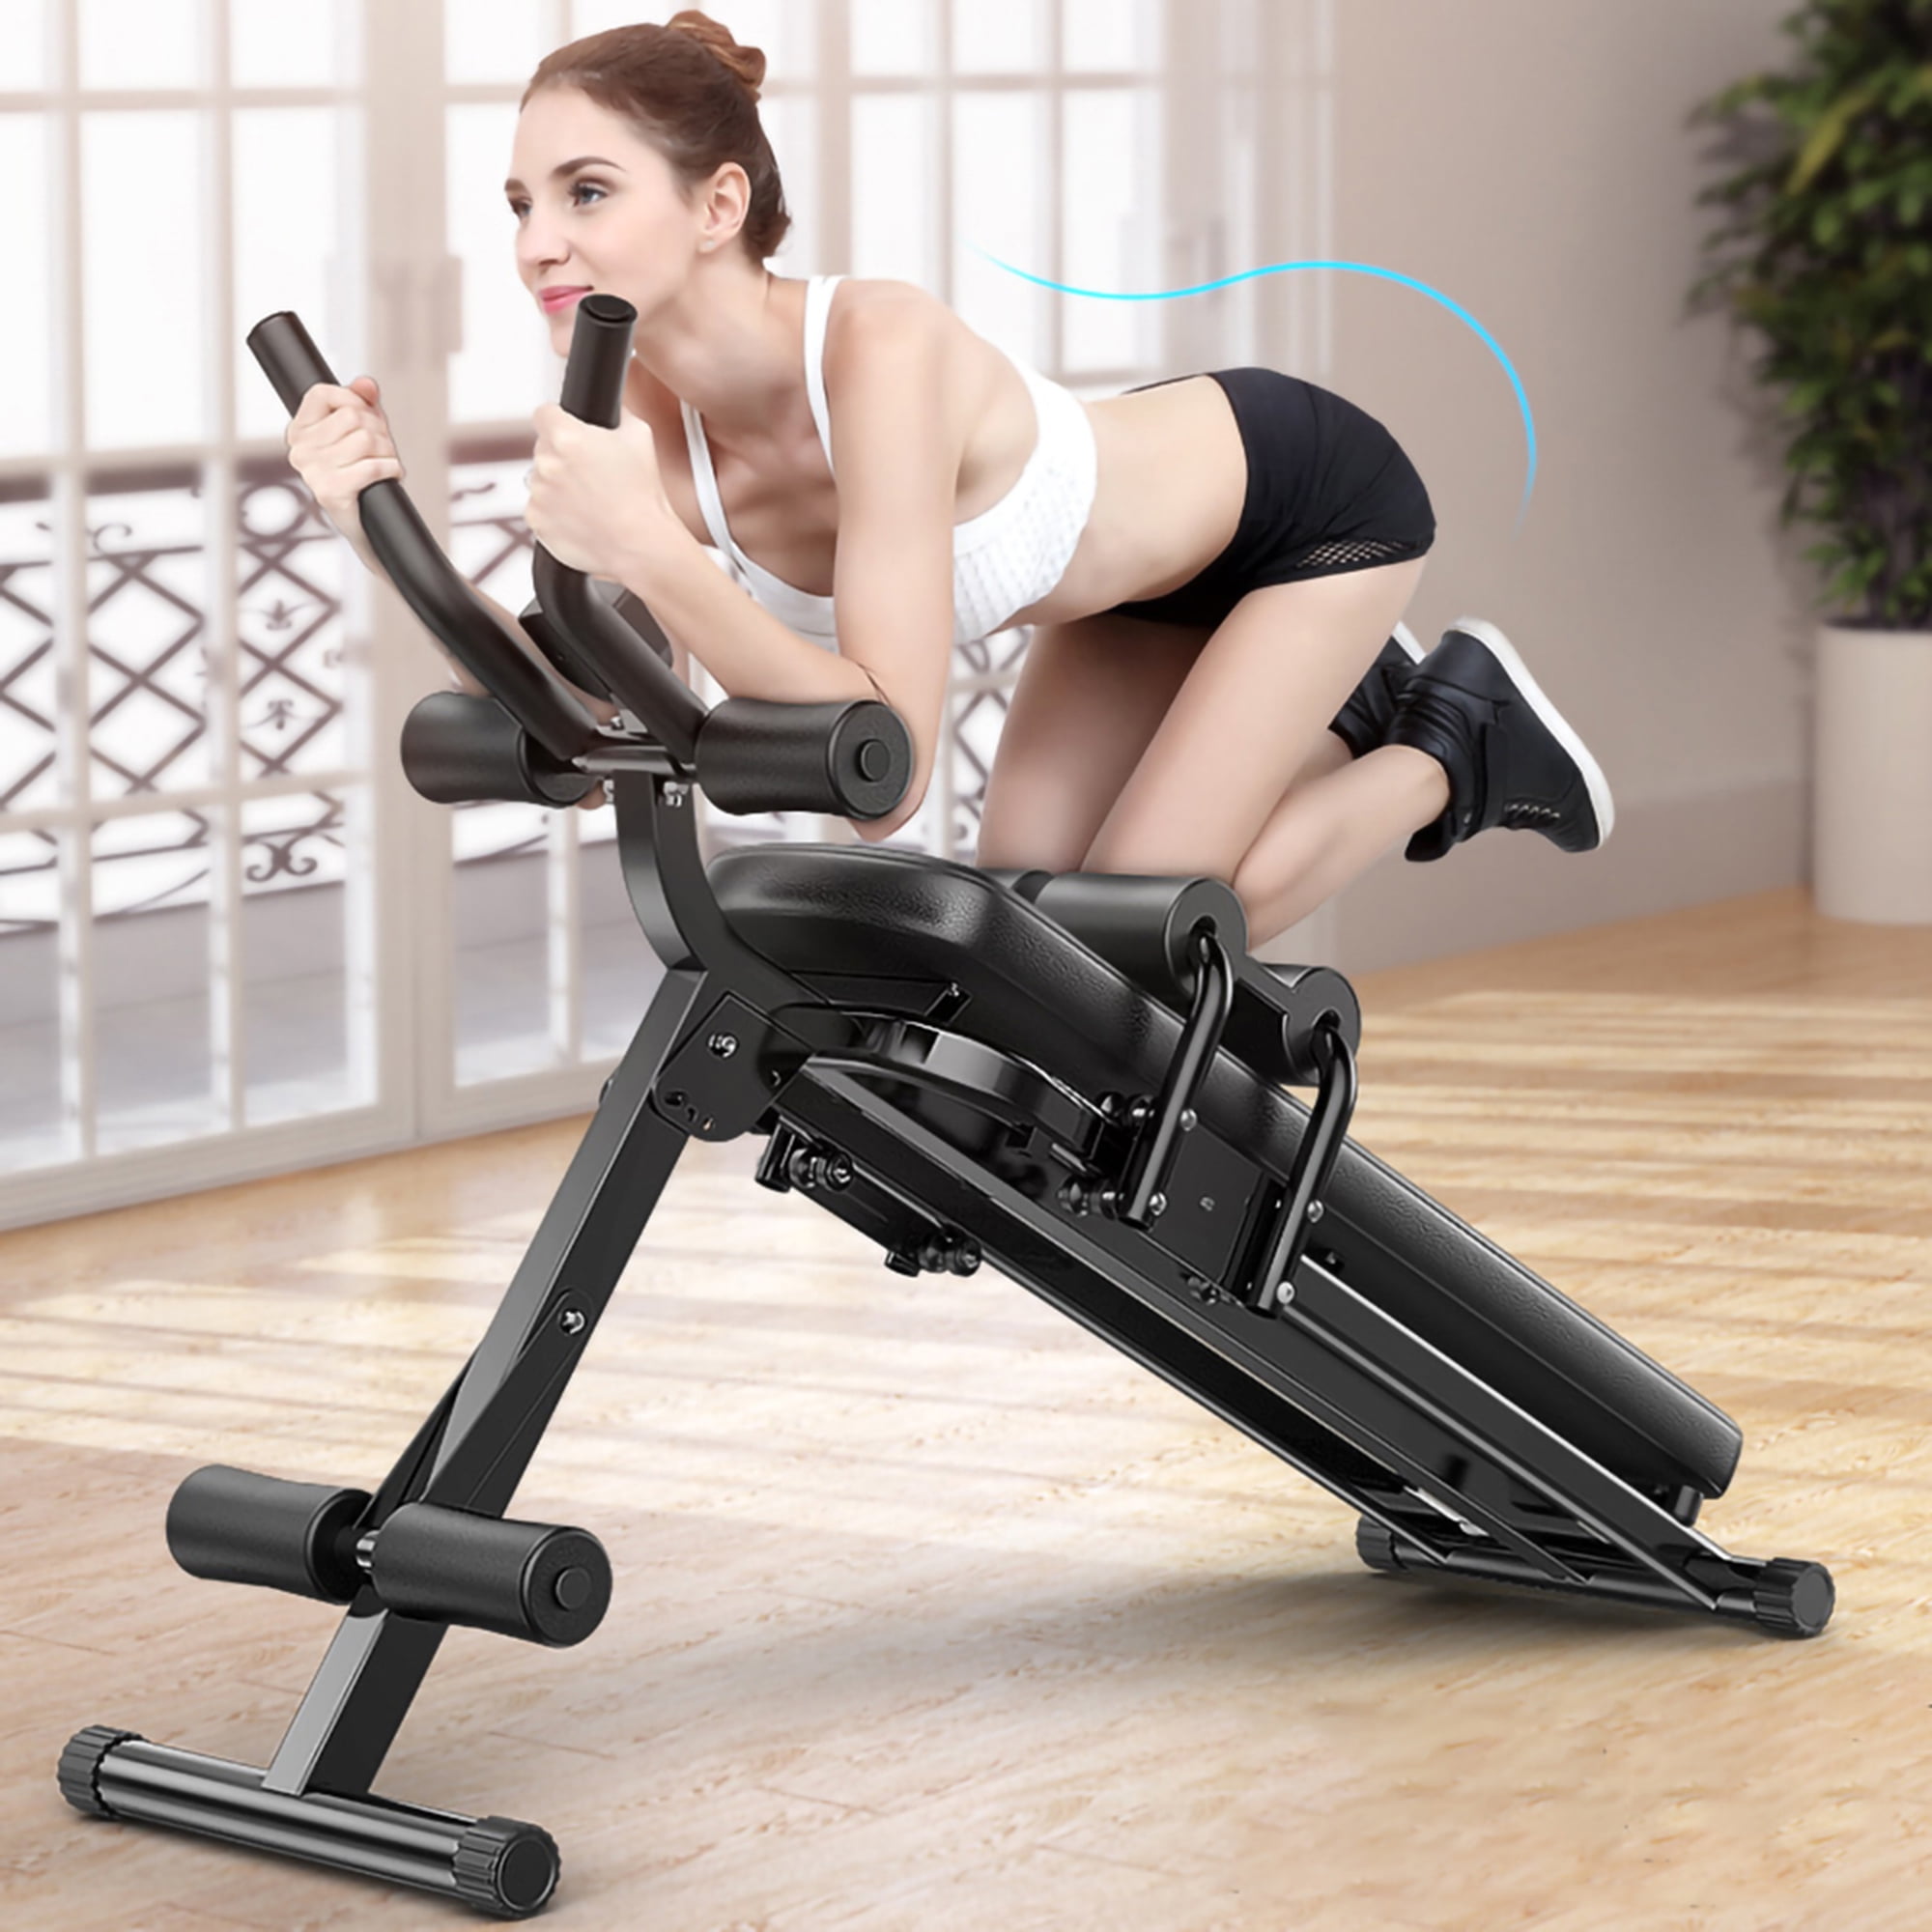 Details about   Home Abdominal Trainer Crunch Machine&Sit Up Bench Core Fitness Gym Exercise USA 